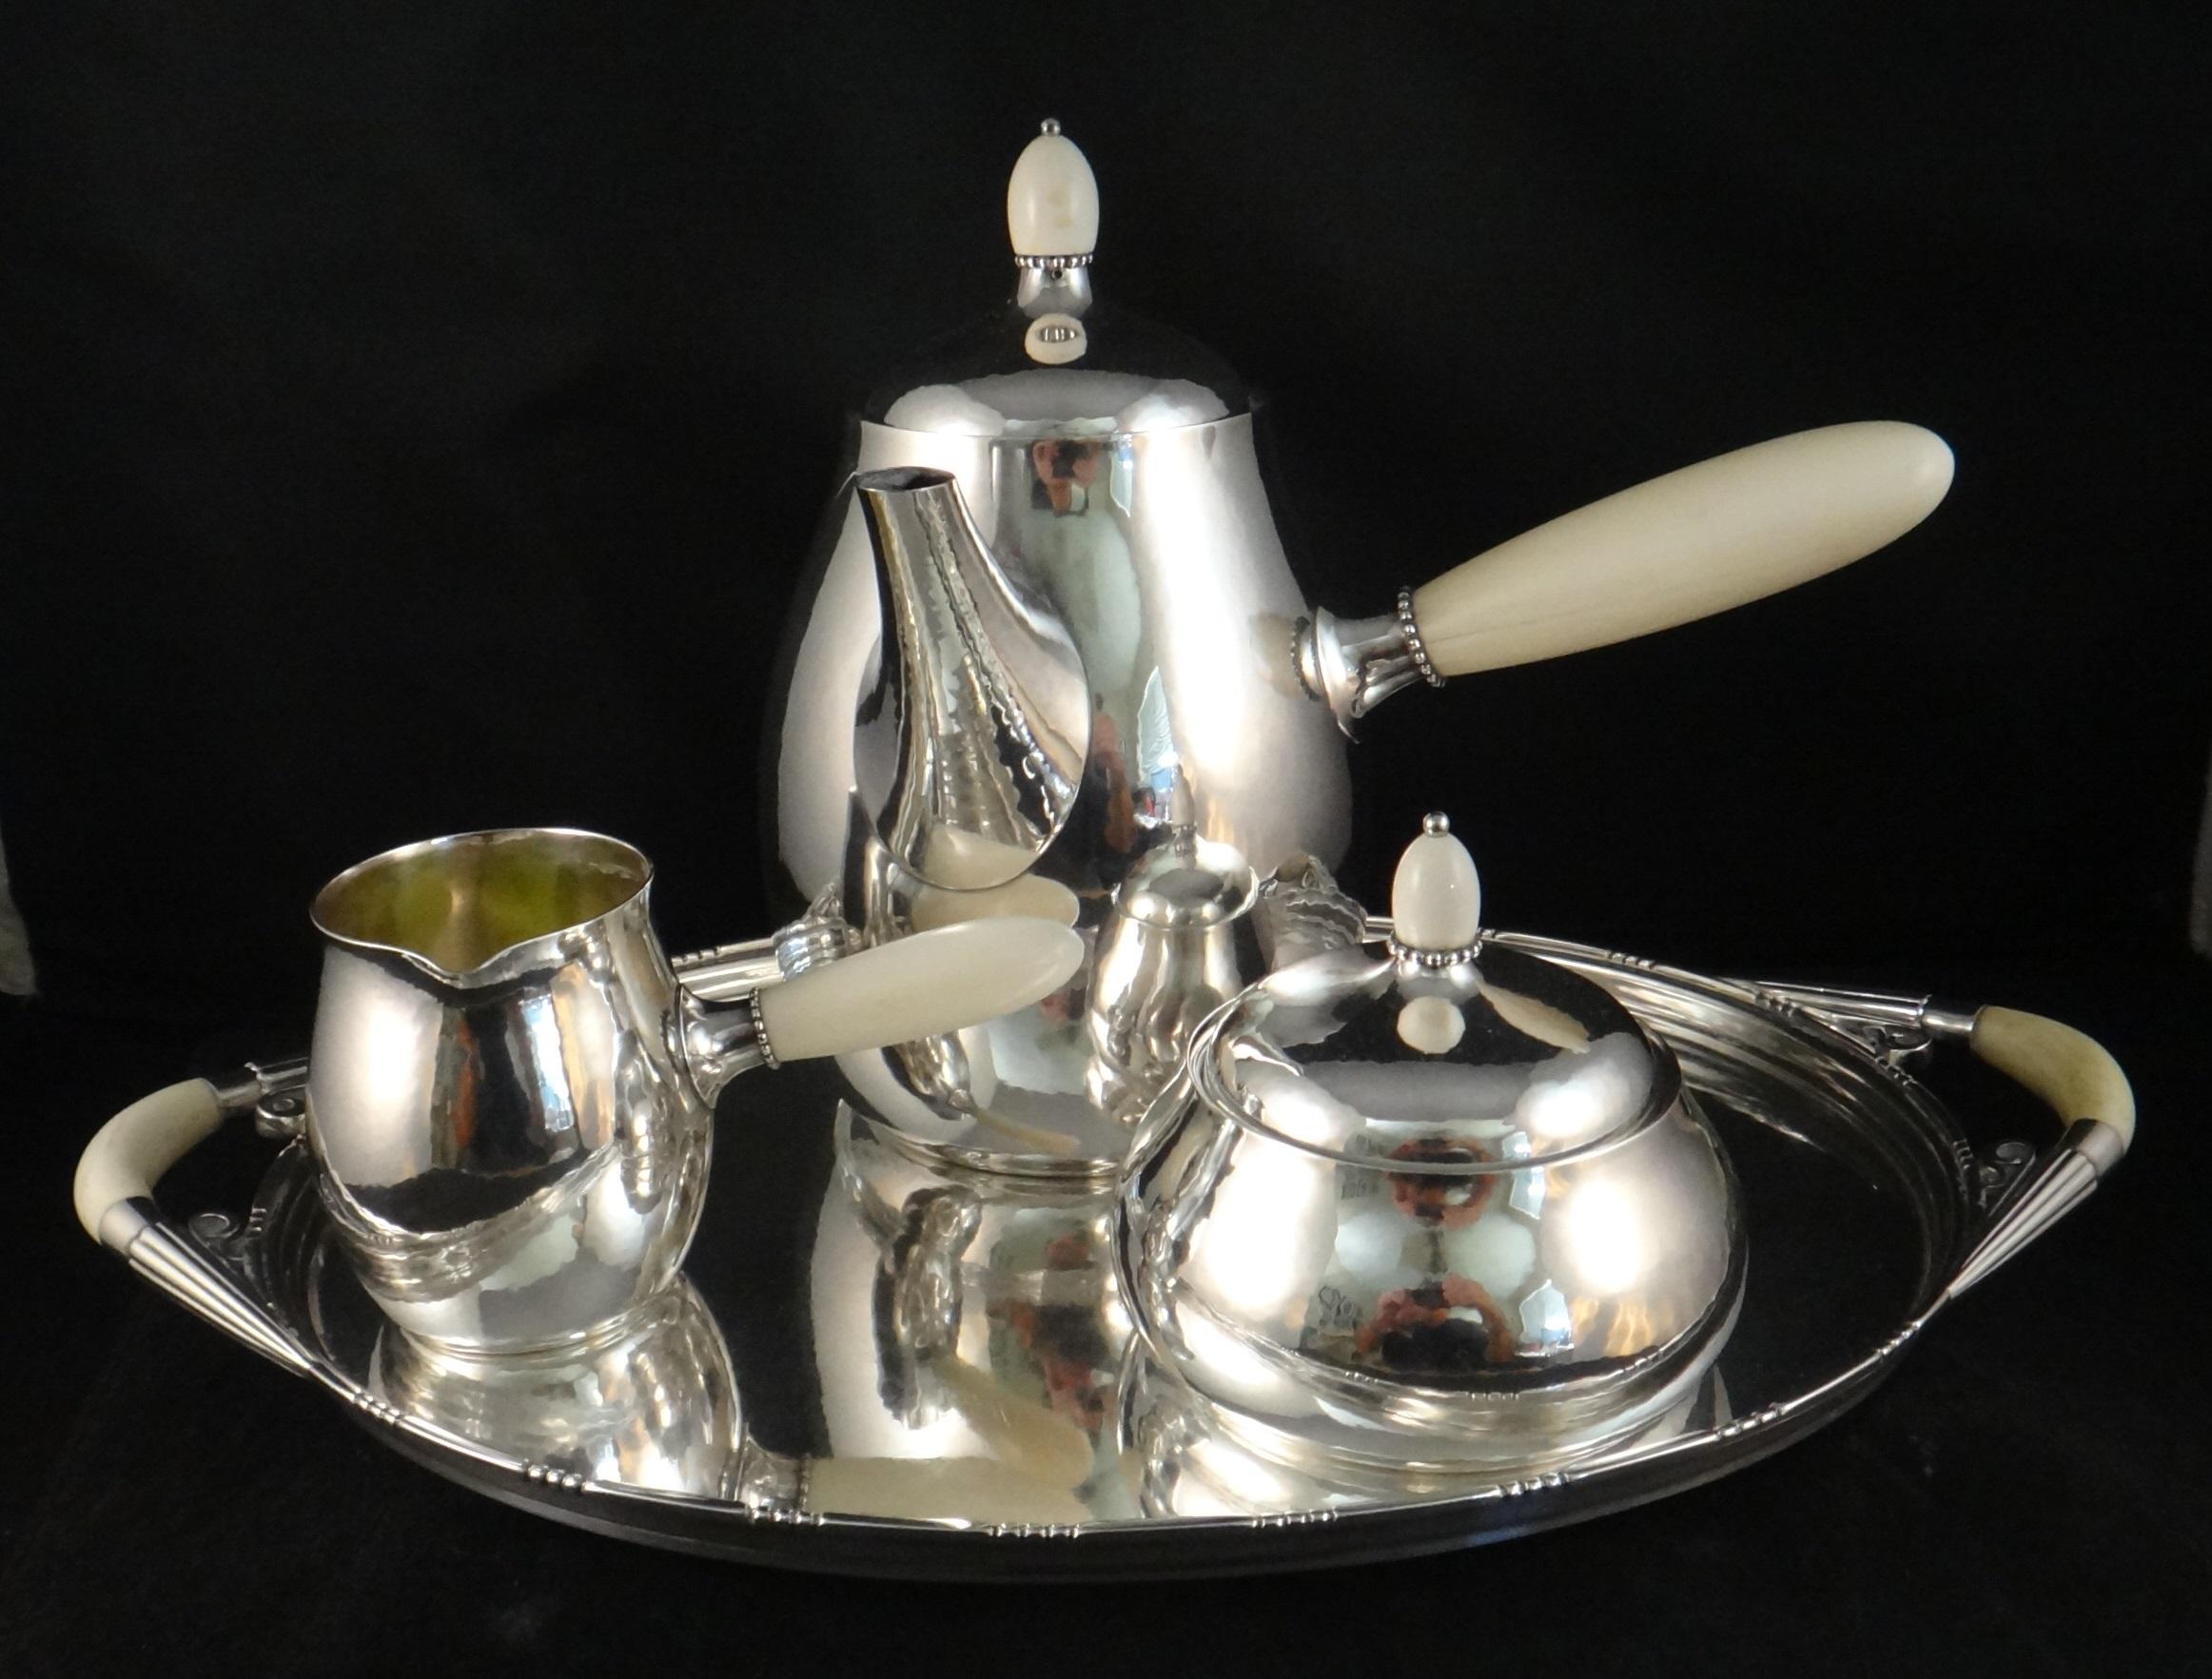 Late 1940's George Jensen sterling silver four piece coffee set. Art Moderne Design. Set includes the sterling silver tray, coffee pot, covered sugar bowl, and creamer. Each piece fully marked (see photos).
Dimensions listed below are for the